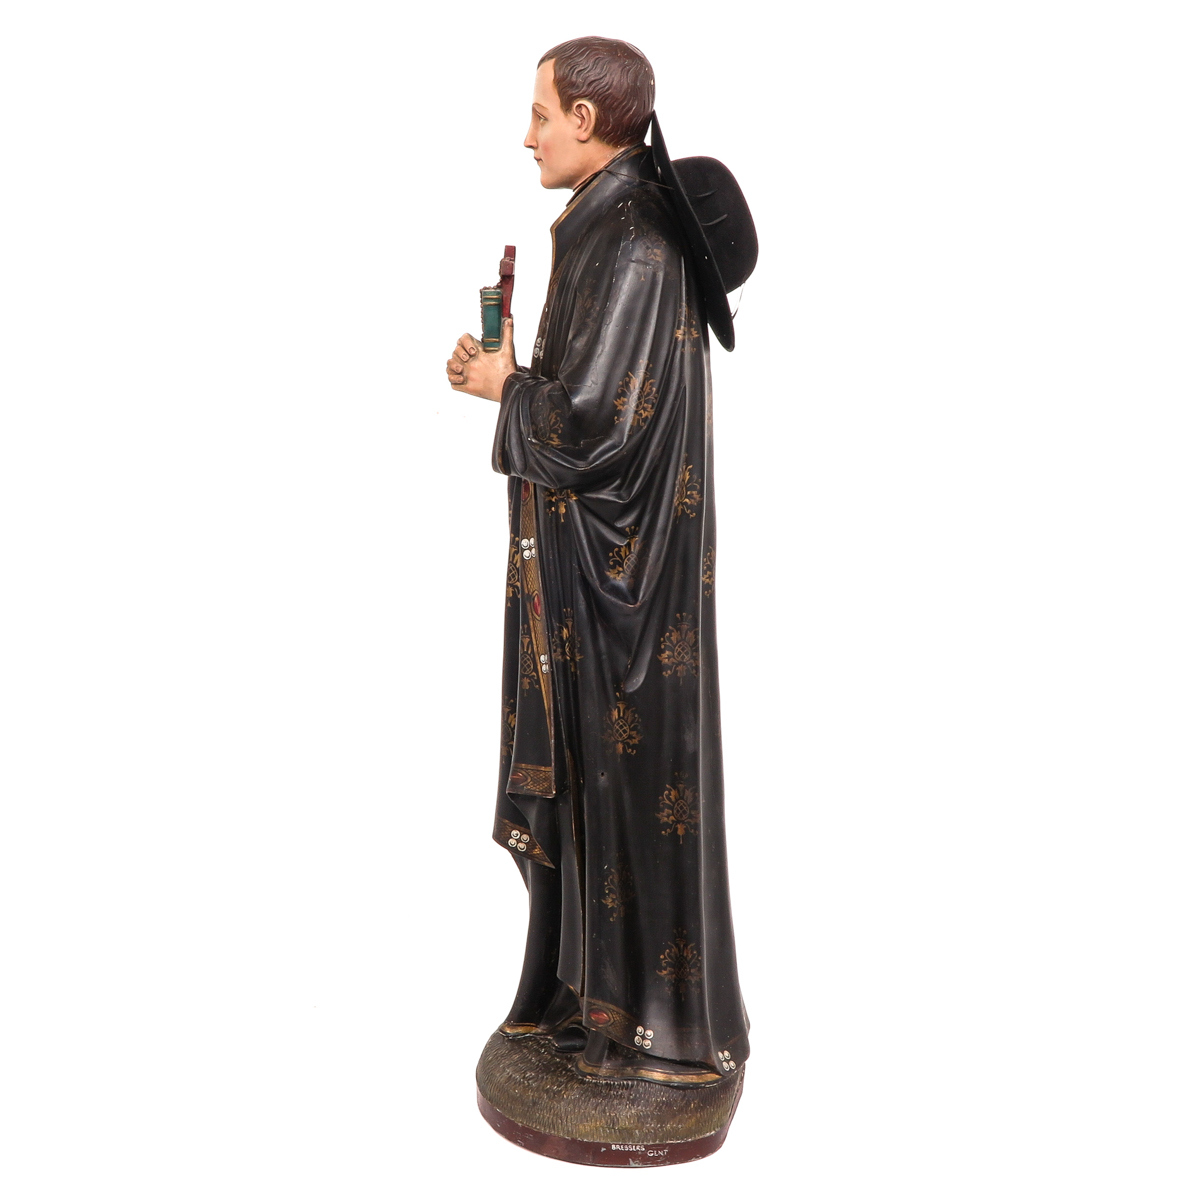 A 19th Cetury Sculpture of Priest - Image 2 of 10